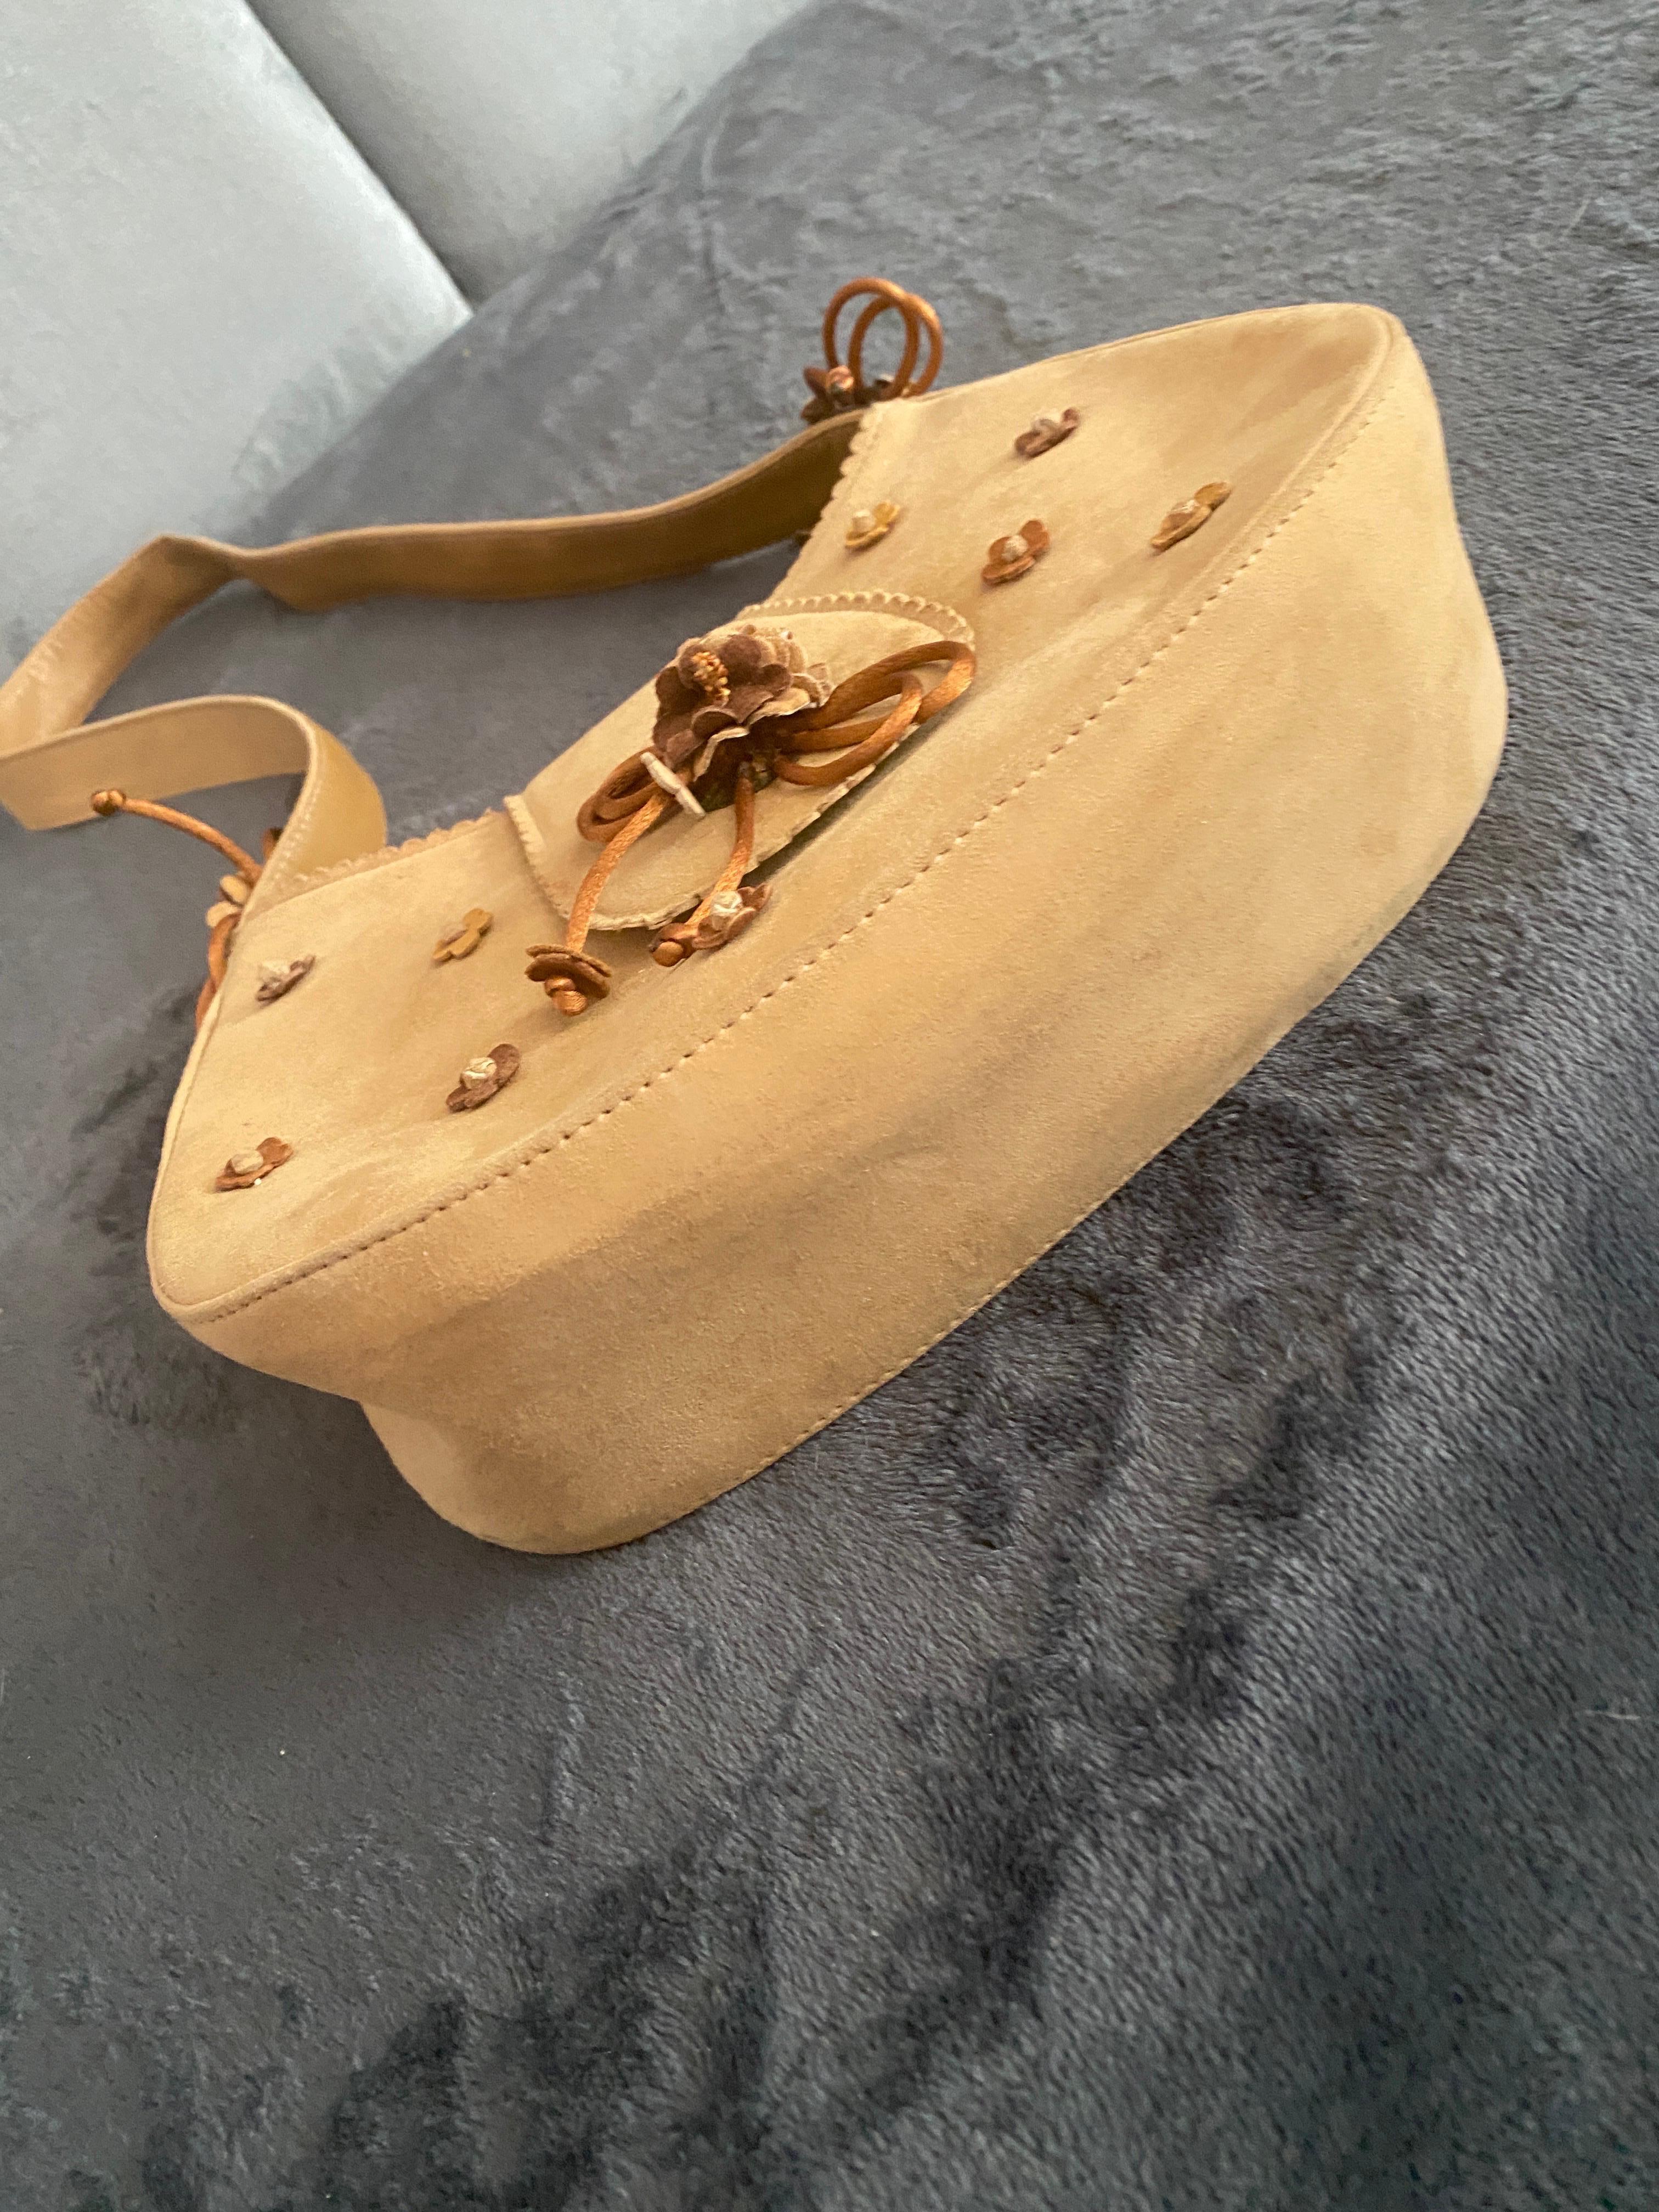 Stuart Weitzman Vintage Brown Suede Handbag with Floral Decoration NWOT In Good Condition For Sale In Palm Springs, CA